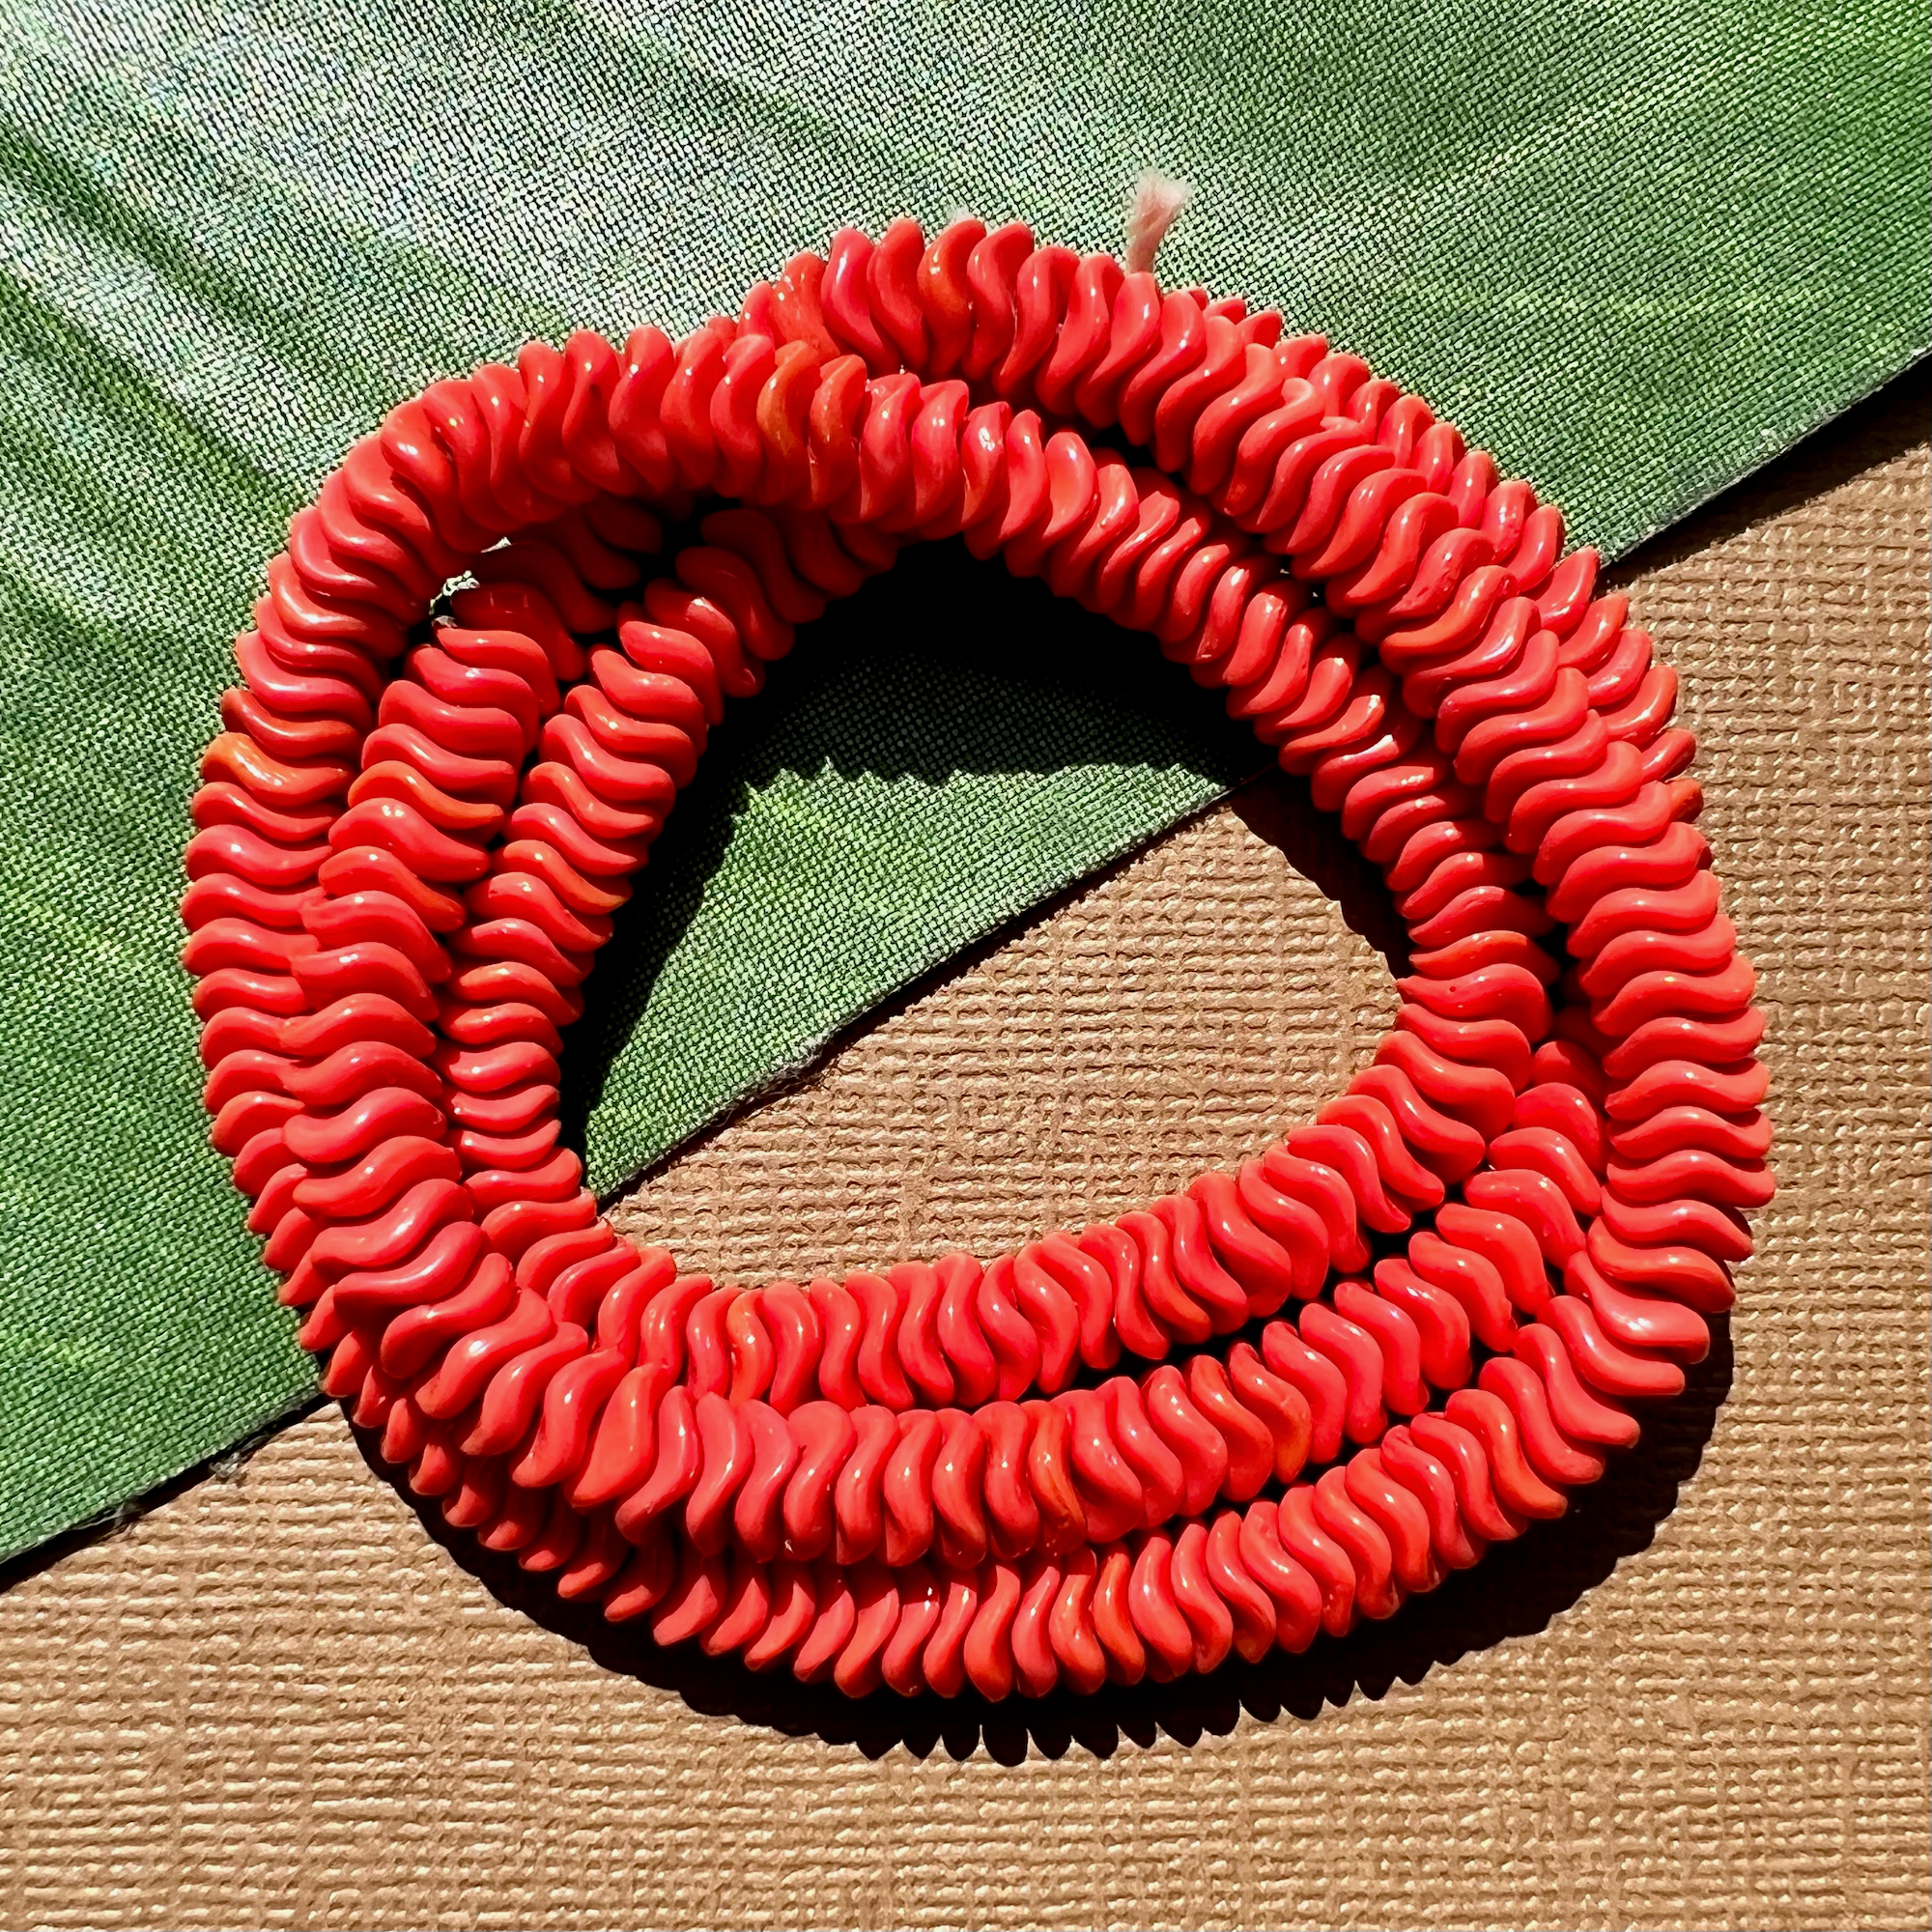 Orange Twisted Saucer Beads - 250 Pieces